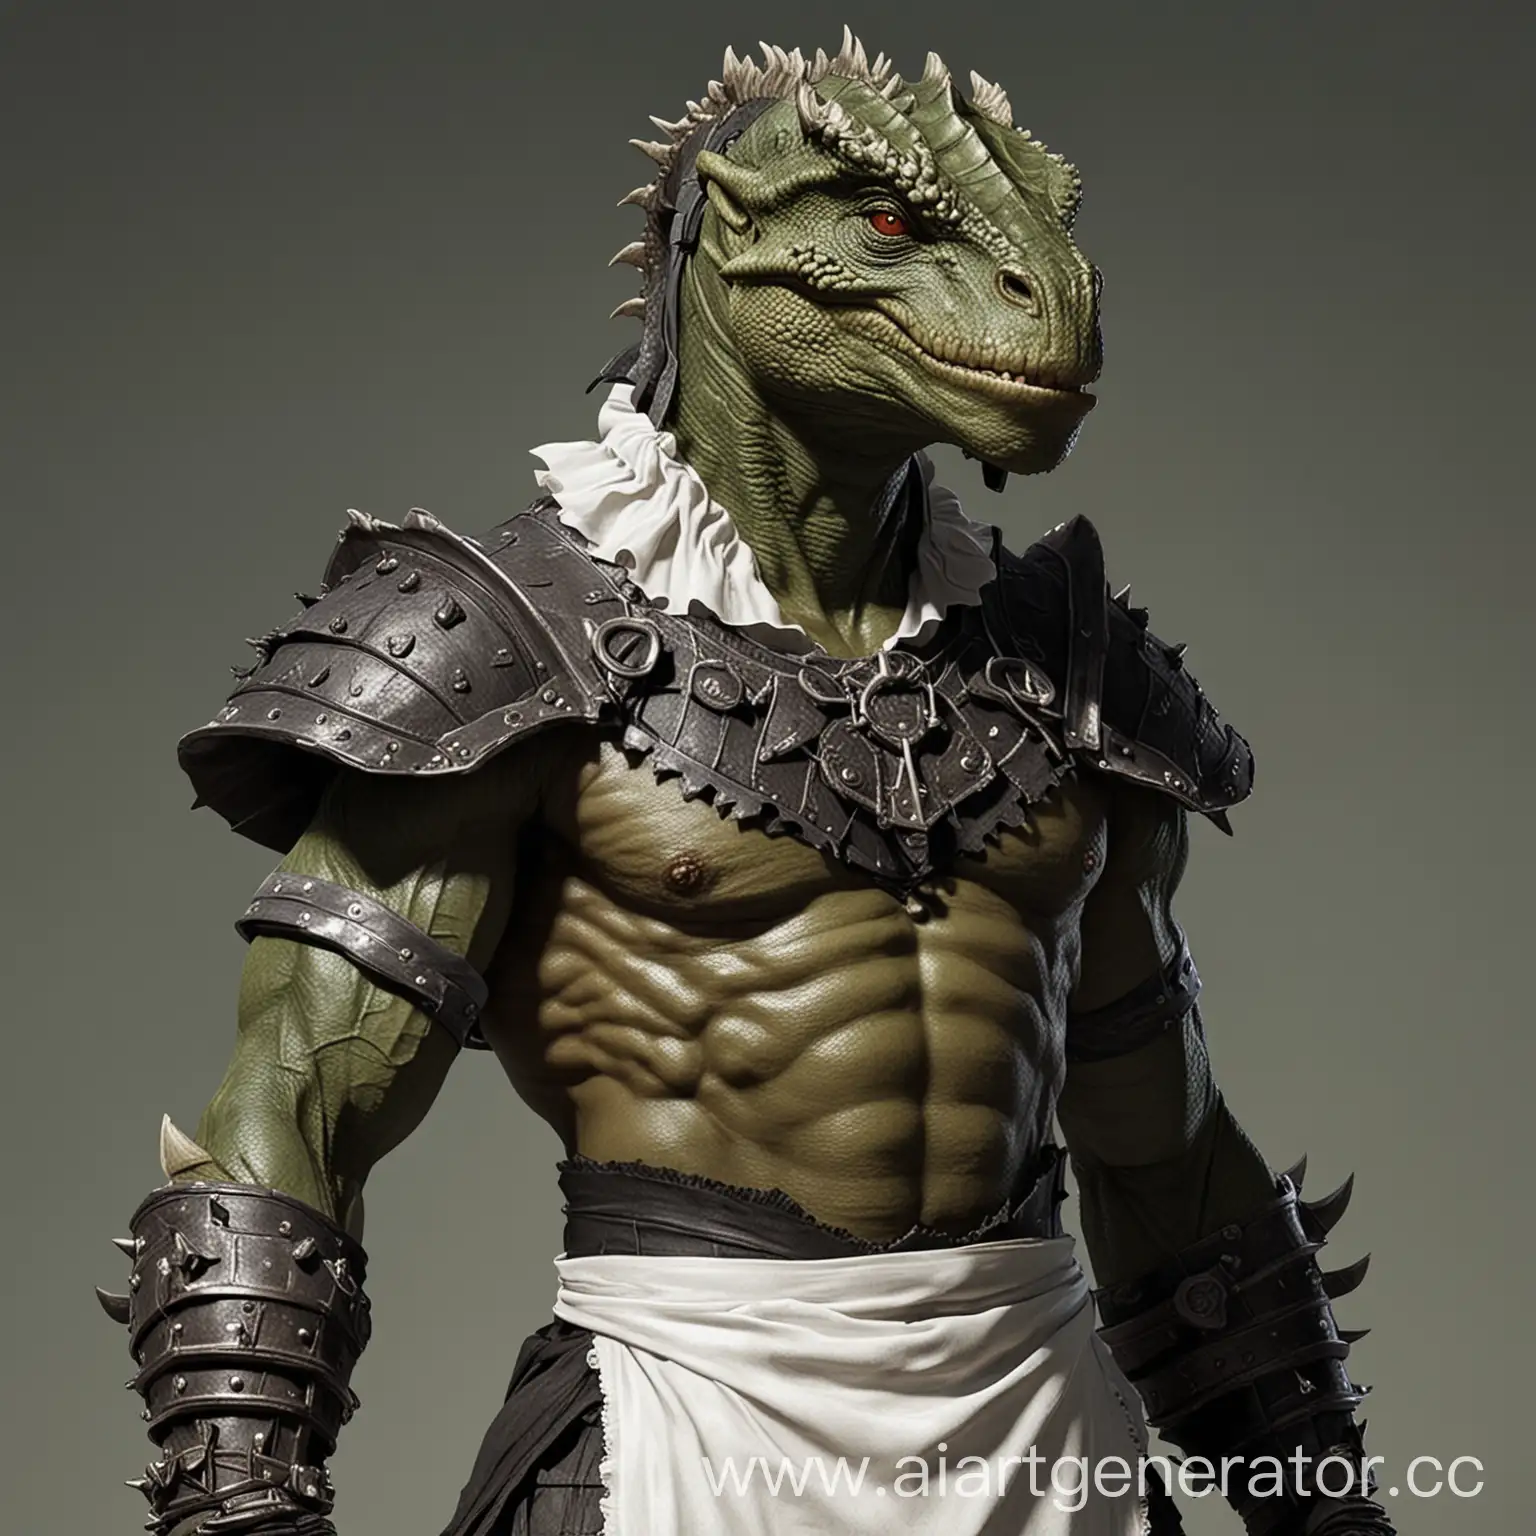 A muscular Argonian man in a maid costume